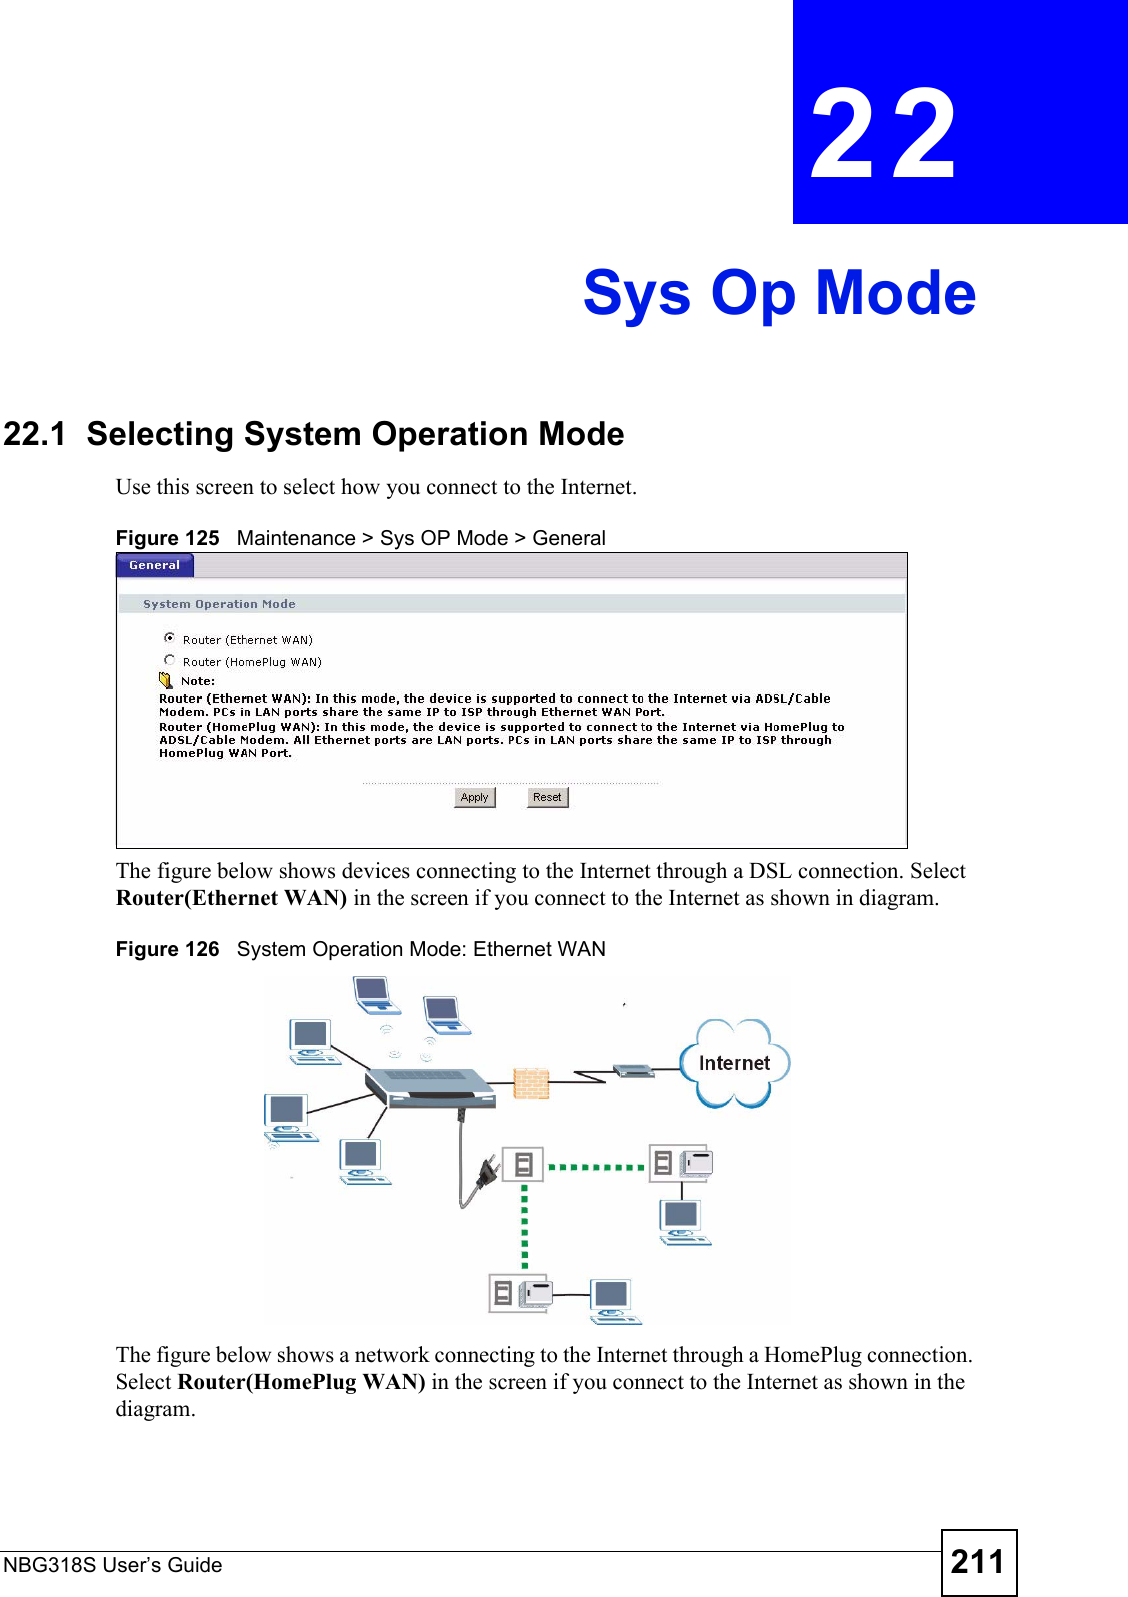 NBG318S User’s Guide 211CHAPTER  22 Sys Op Mode22.1  Selecting System Operation ModeUse this screen to select how you connect to the Internet.Figure 125   Maintenance &gt; Sys OP Mode &gt; General The figure below shows devices connecting to the Internet through a DSL connection. Select Router(Ethernet WAN) in the screen if you connect to the Internet as shown in diagram.Figure 126   System Operation Mode: Ethernet WAN The figure below shows a network connecting to the Internet through a HomePlug connection. Select Router(HomePlug WAN) in the screen if you connect to the Internet as shown in the diagram.    